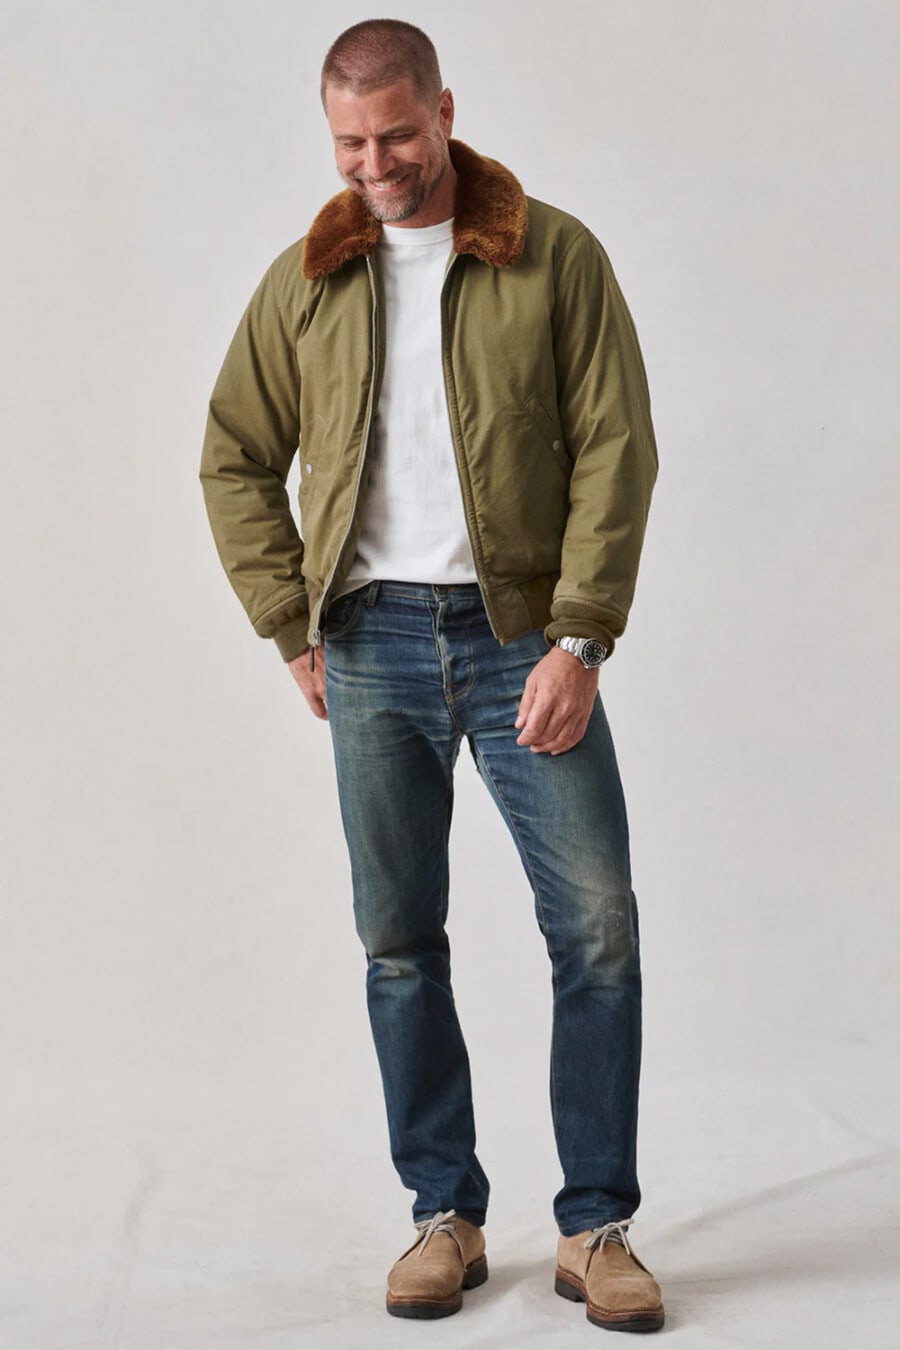 Men's blue jeans, white T-shirt, green brown fur collar bomber jacket and light brown suede shoes outfit